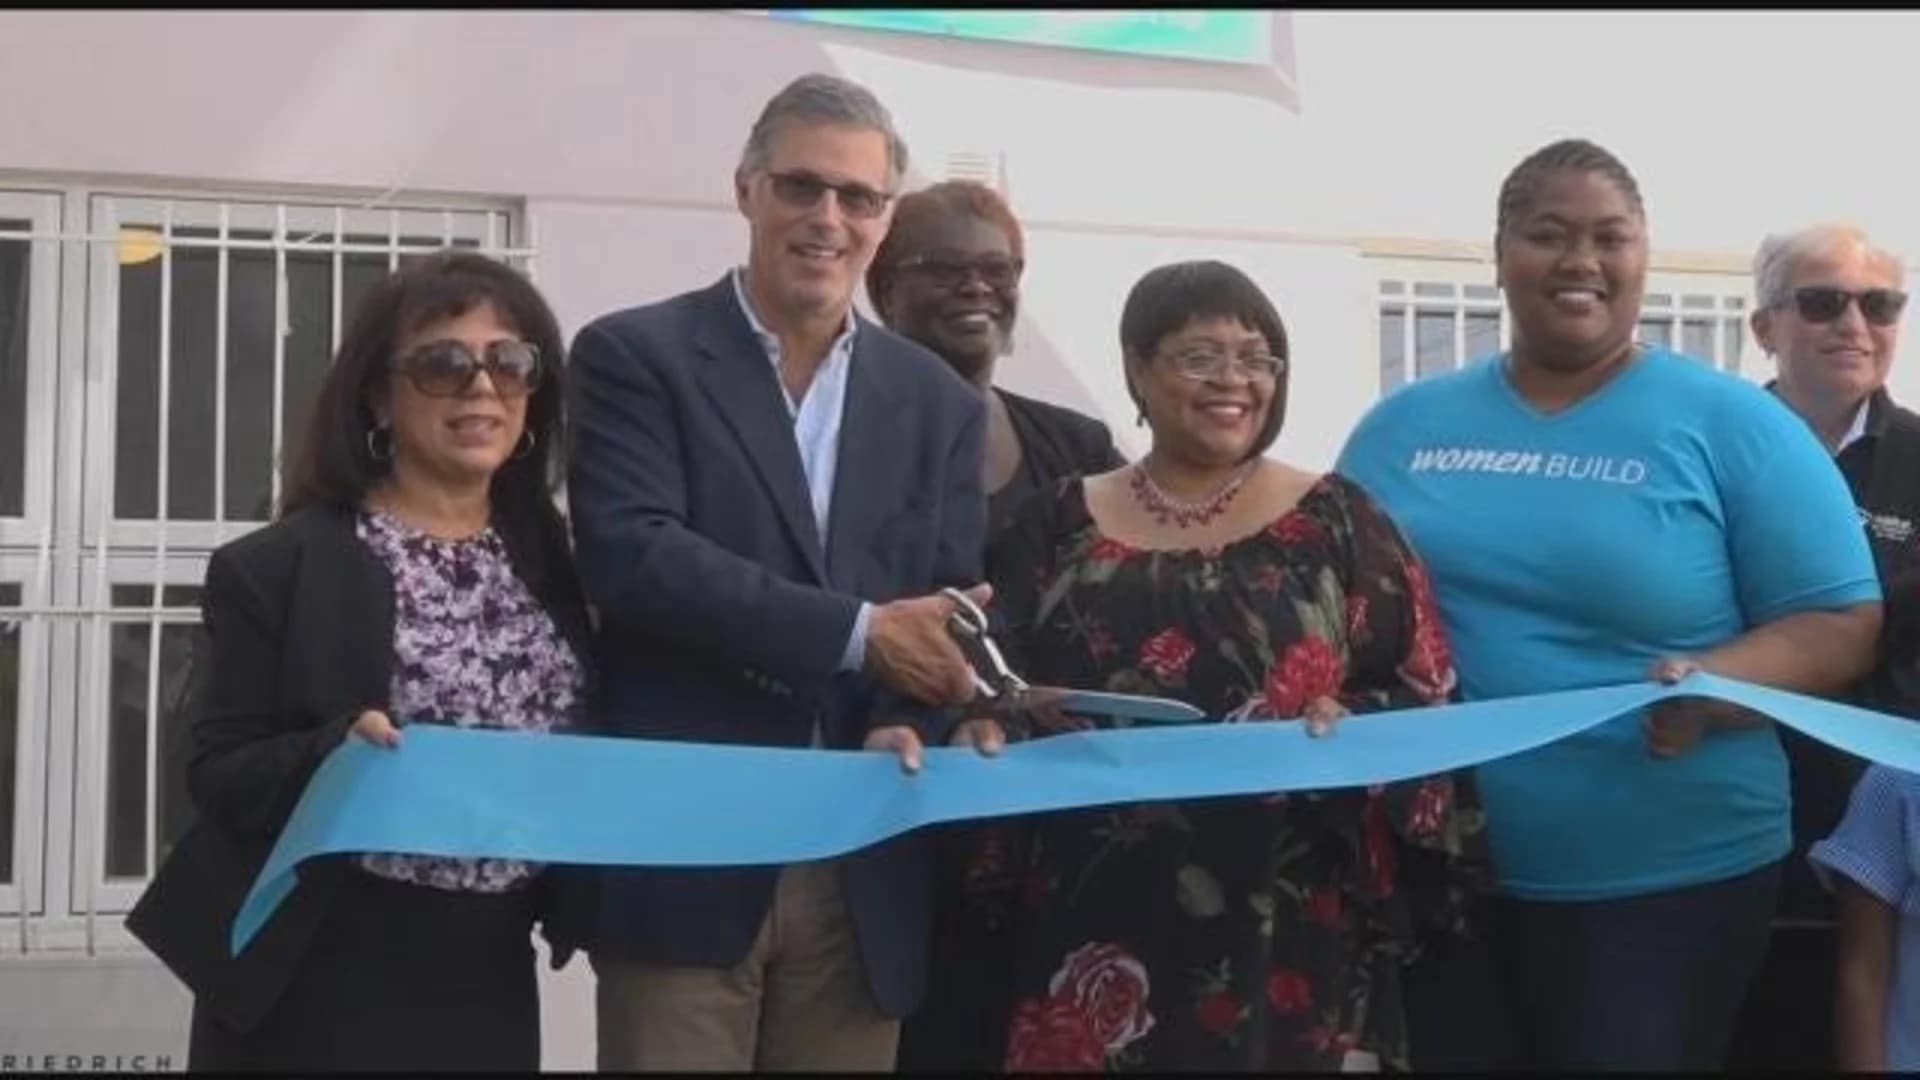 Habitat for Humanity NYC unveils affordable housing to 15 families